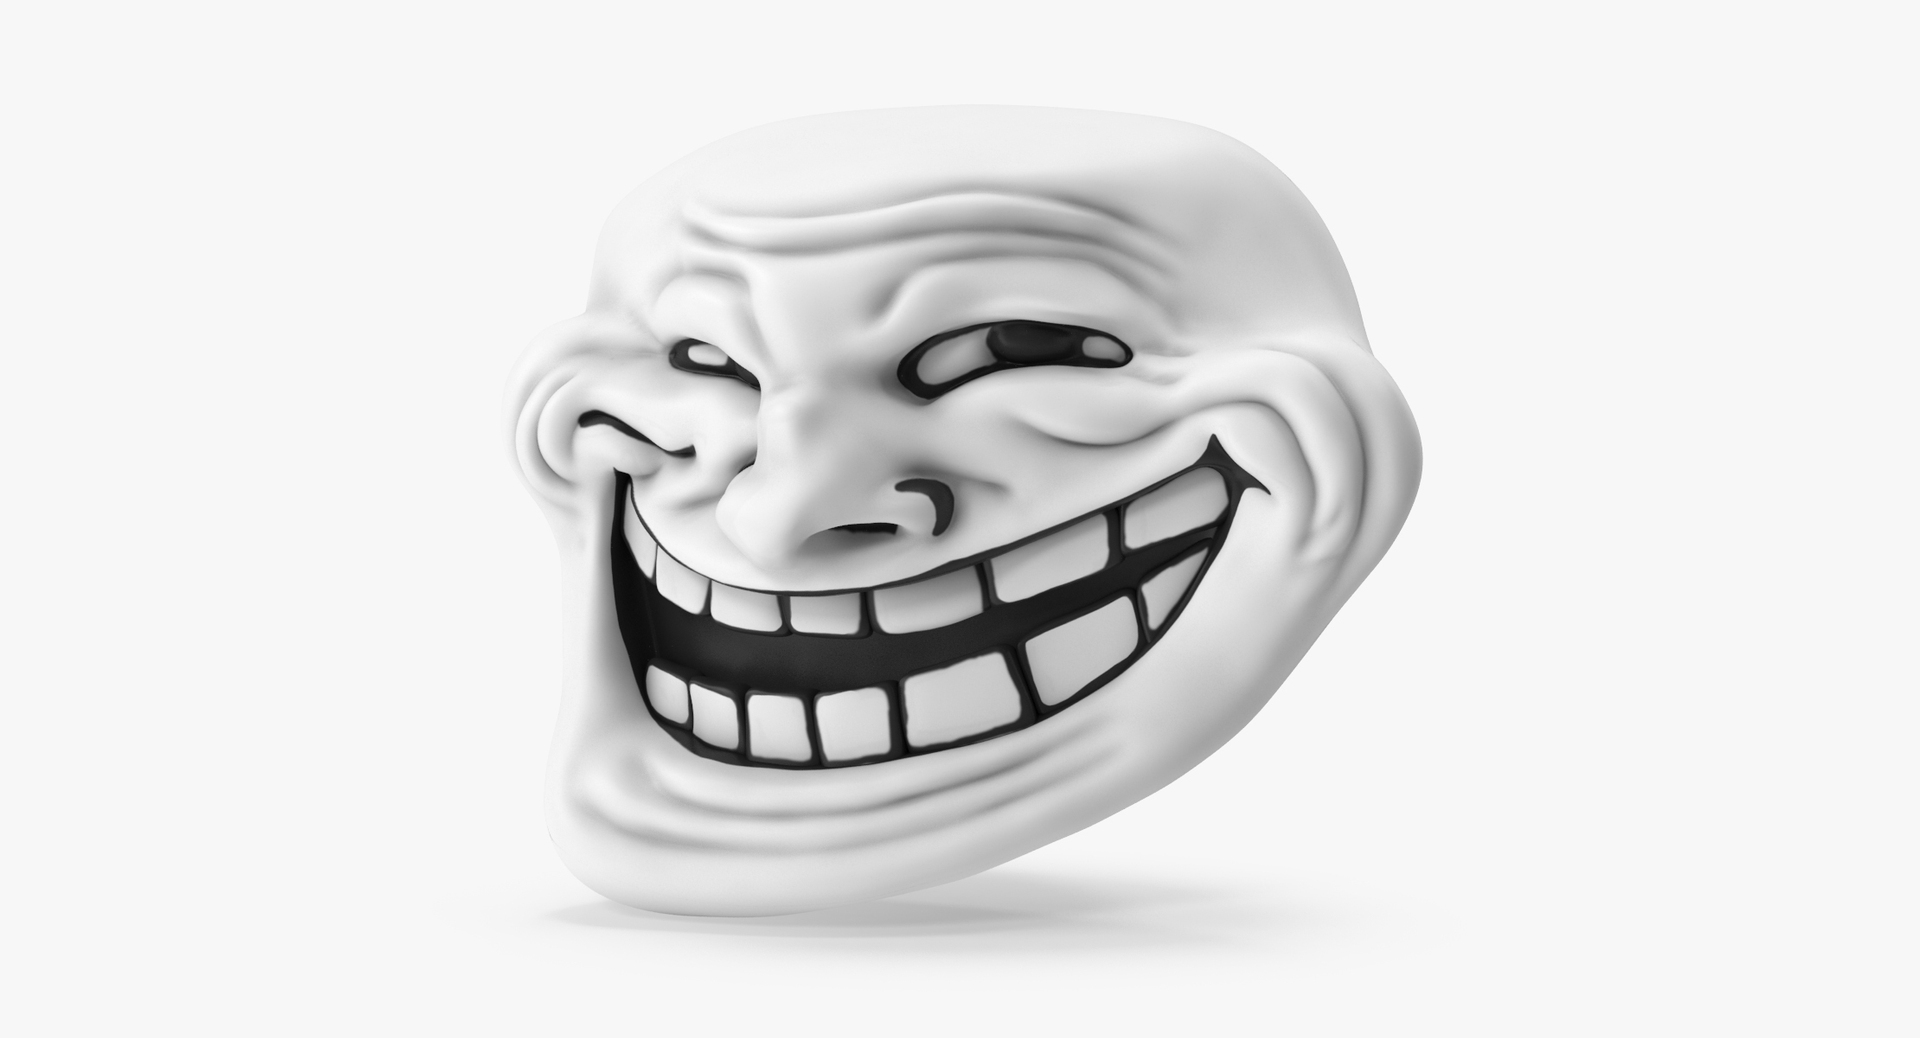 The Ultimate Troll Face Pack